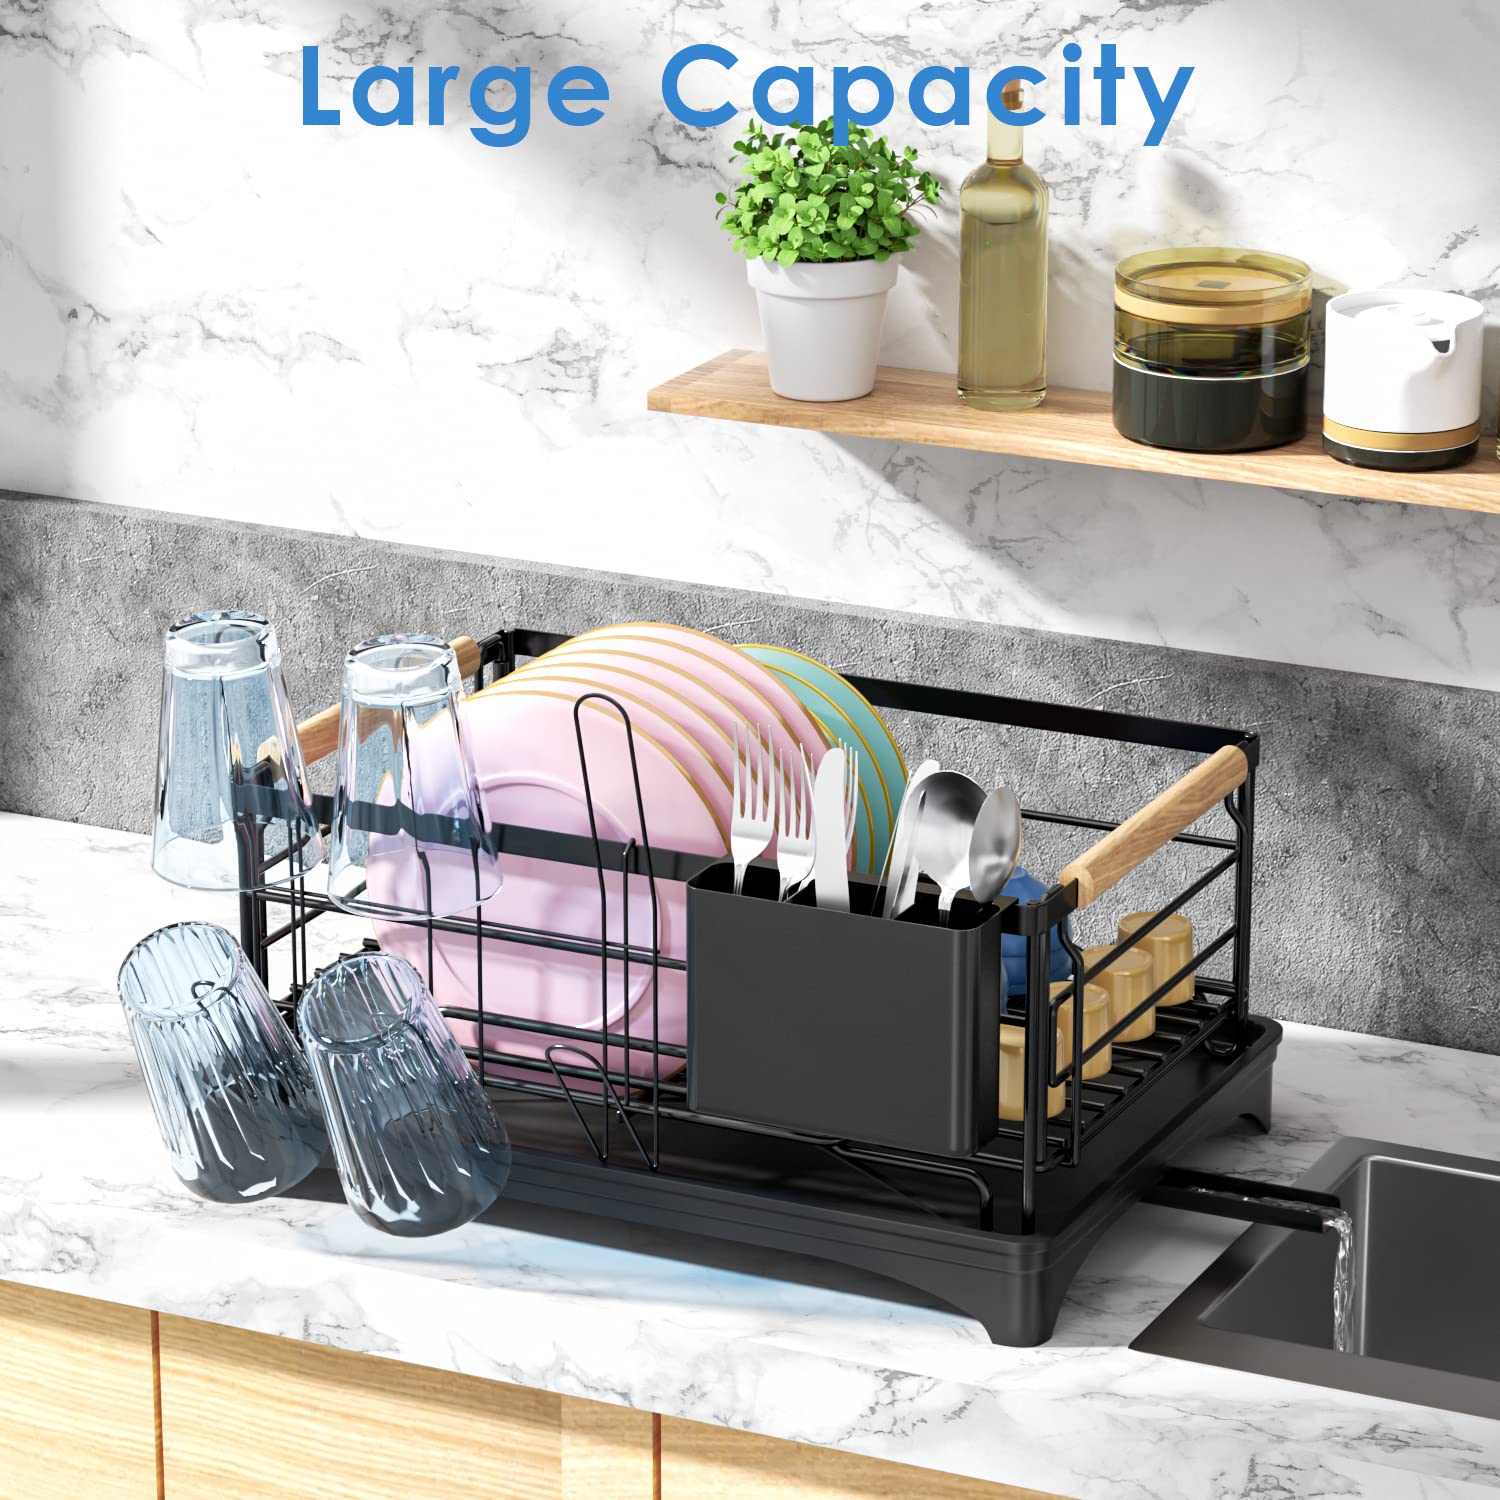 thinkstar Dish Drying Rack, Dish Rack For Kitchen Counter, Rust-Proof Dish Drainer With Drying Board And Utensil Holder For Kitchen